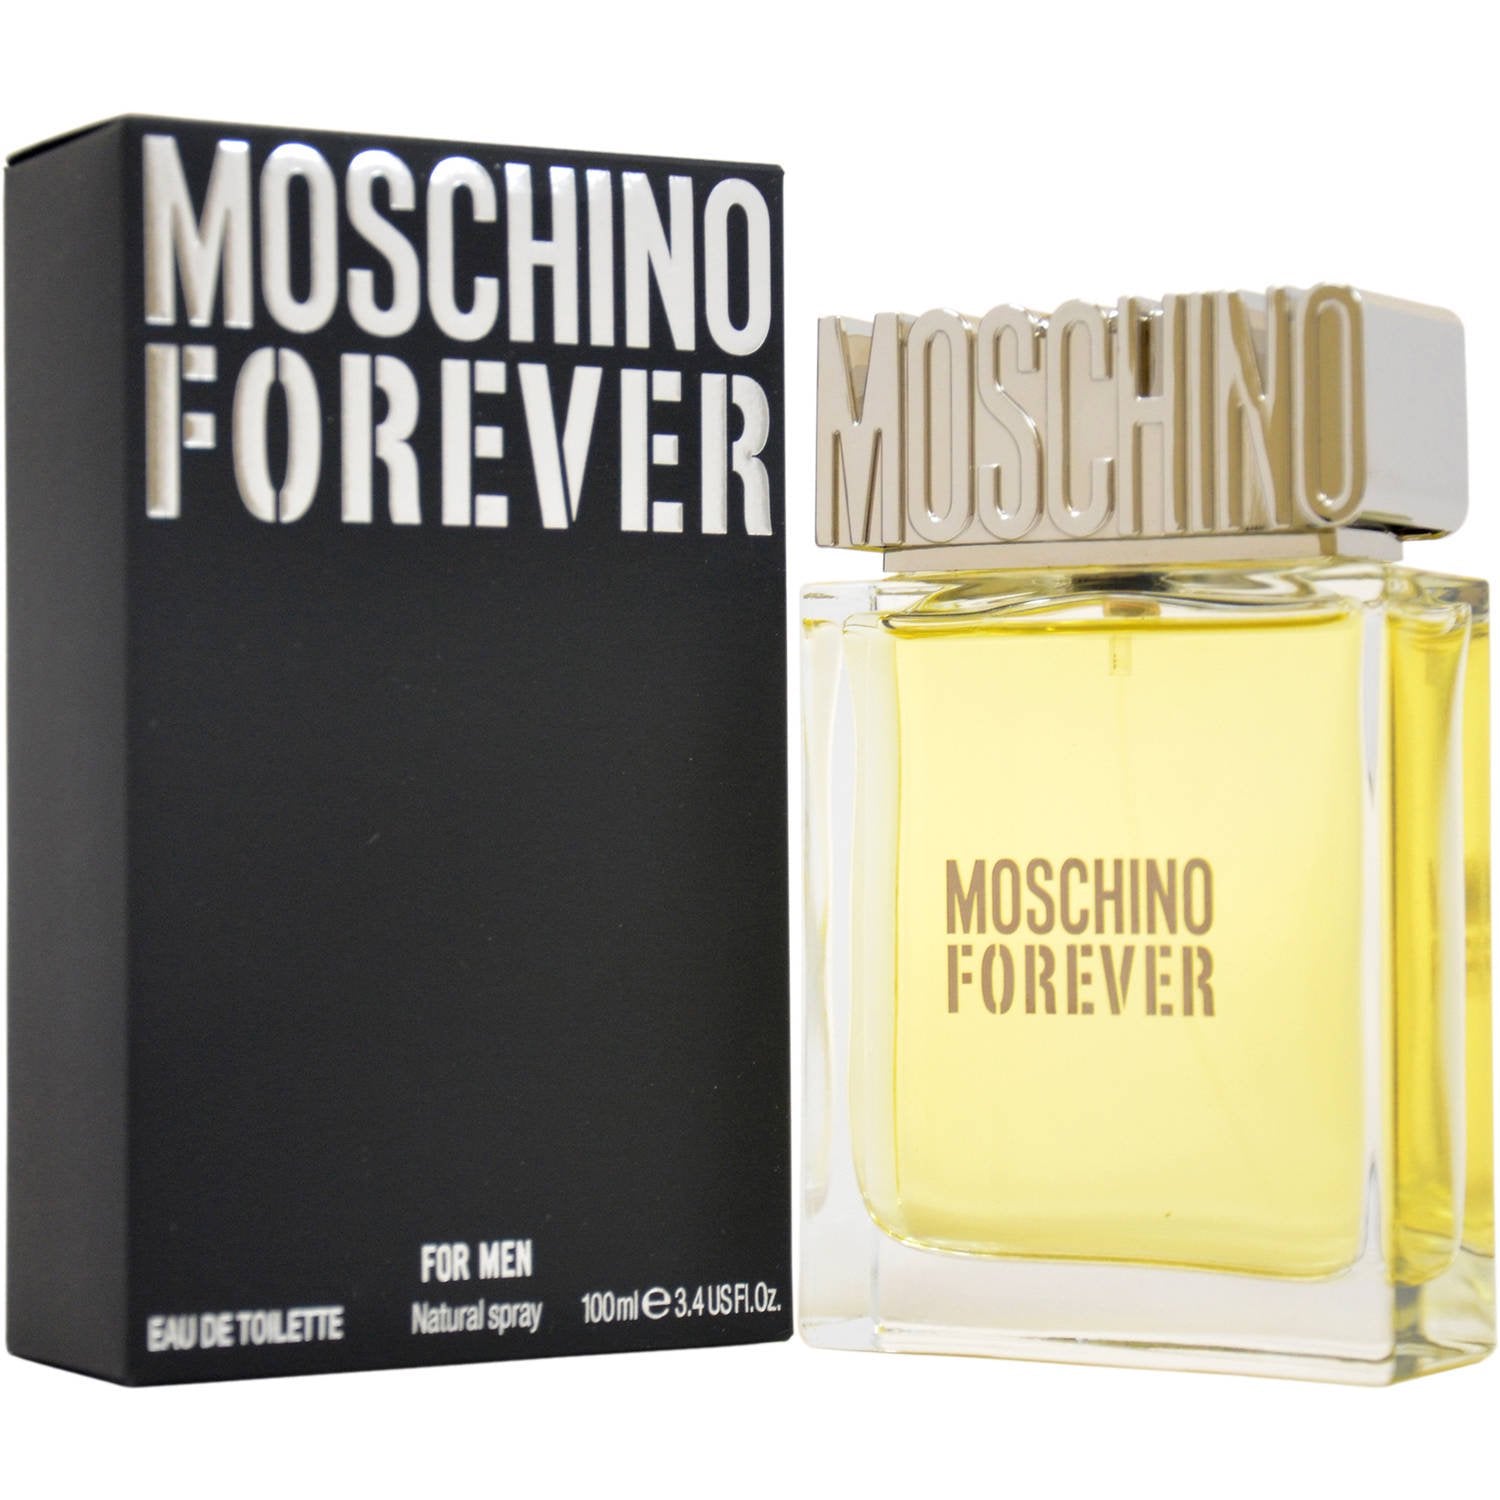 Moschino Forever By Moschino EDT Spray 3.4 oz For Men